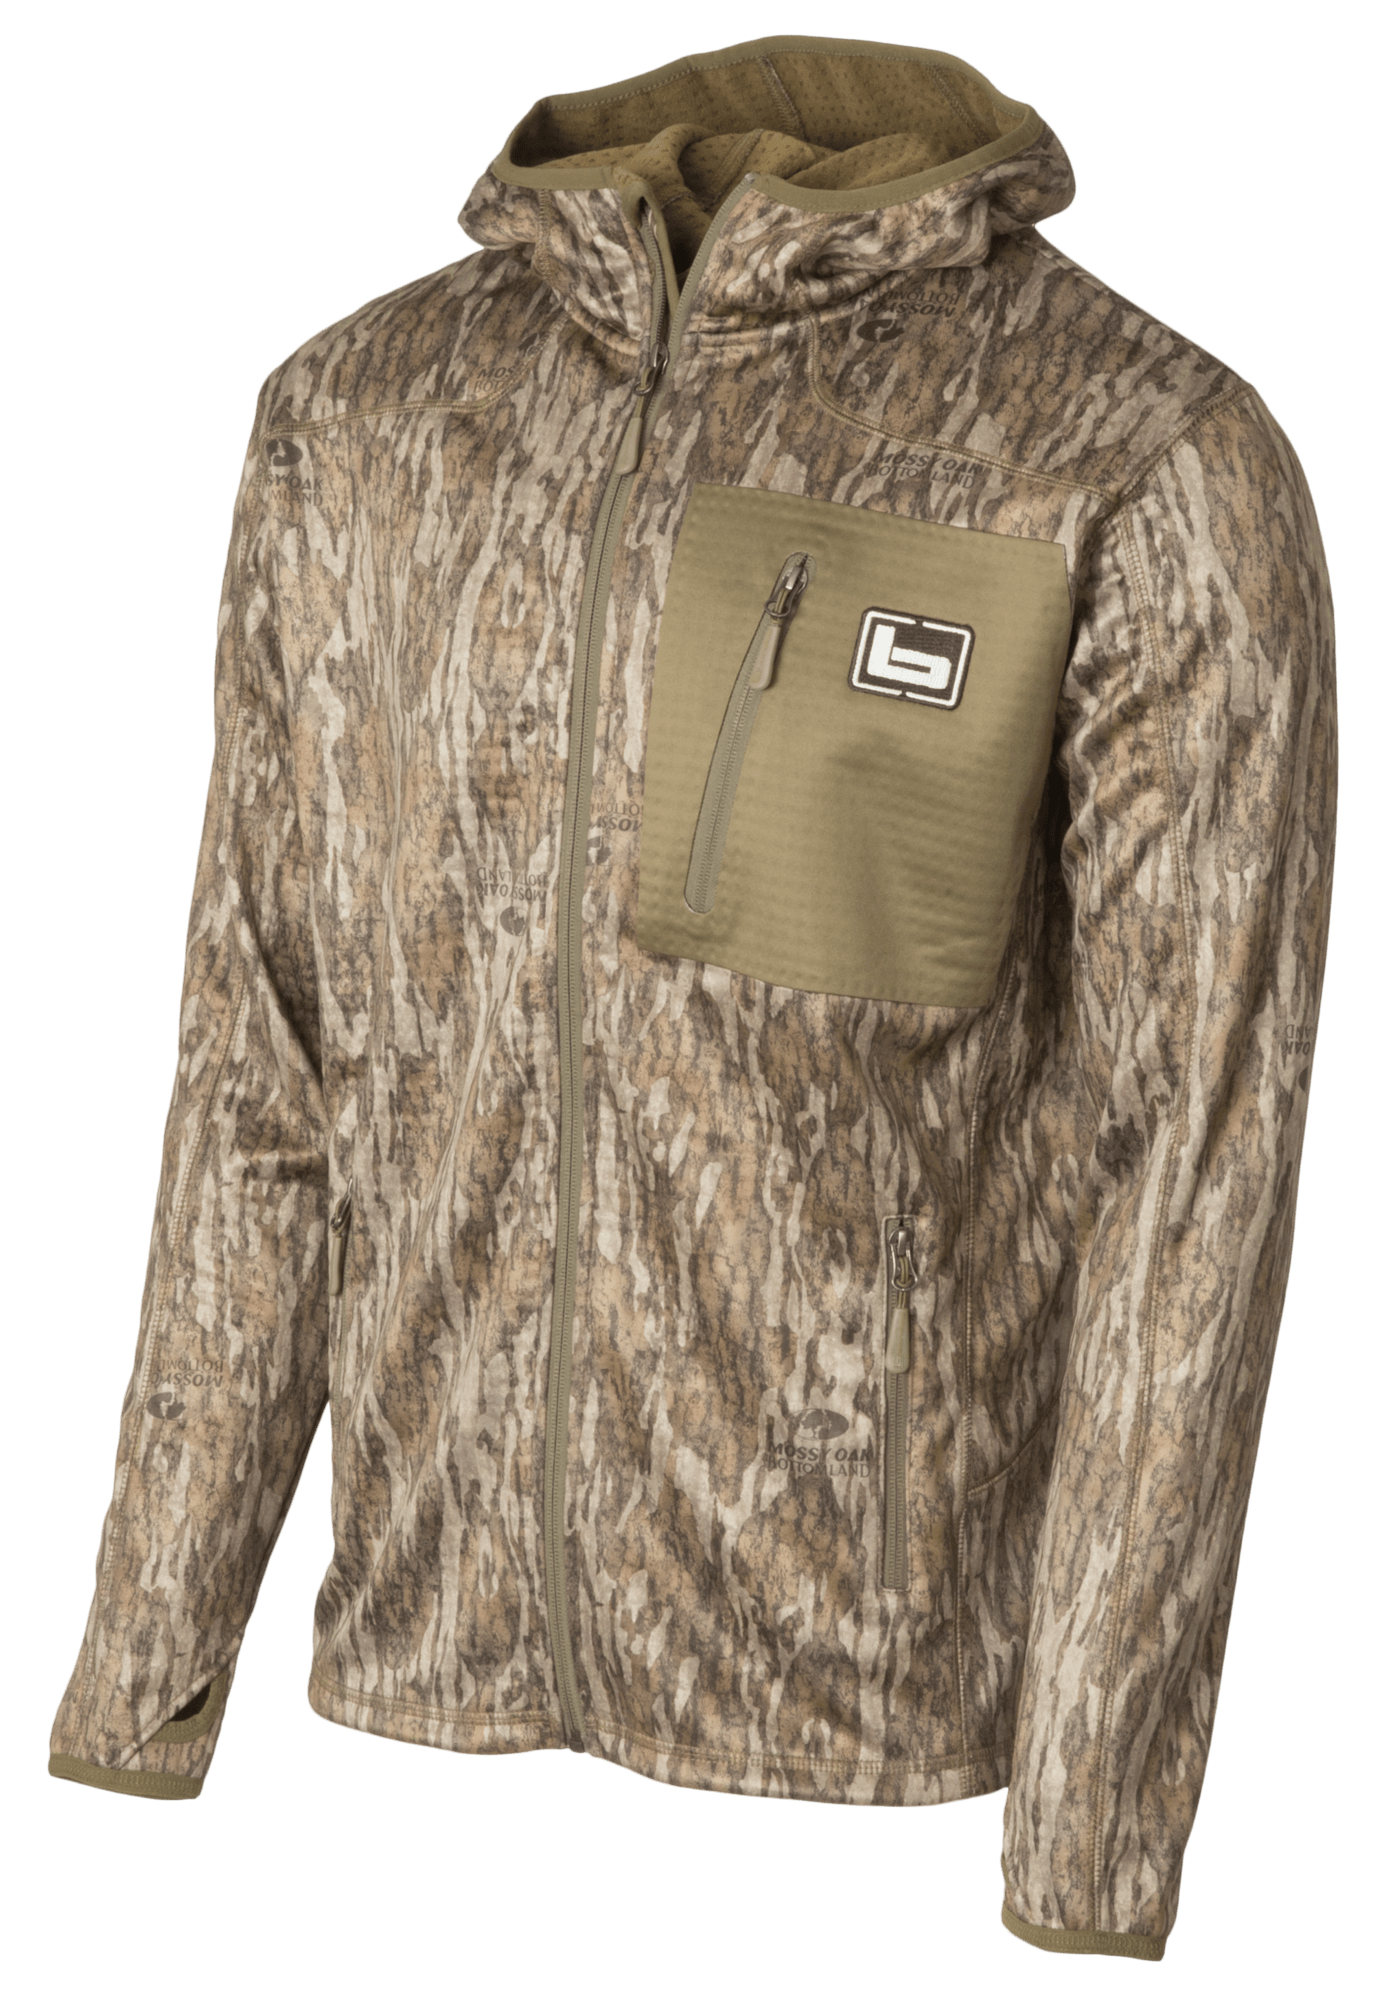 Banded Hooded Mid-Layer Jacket by Texas Fowlers